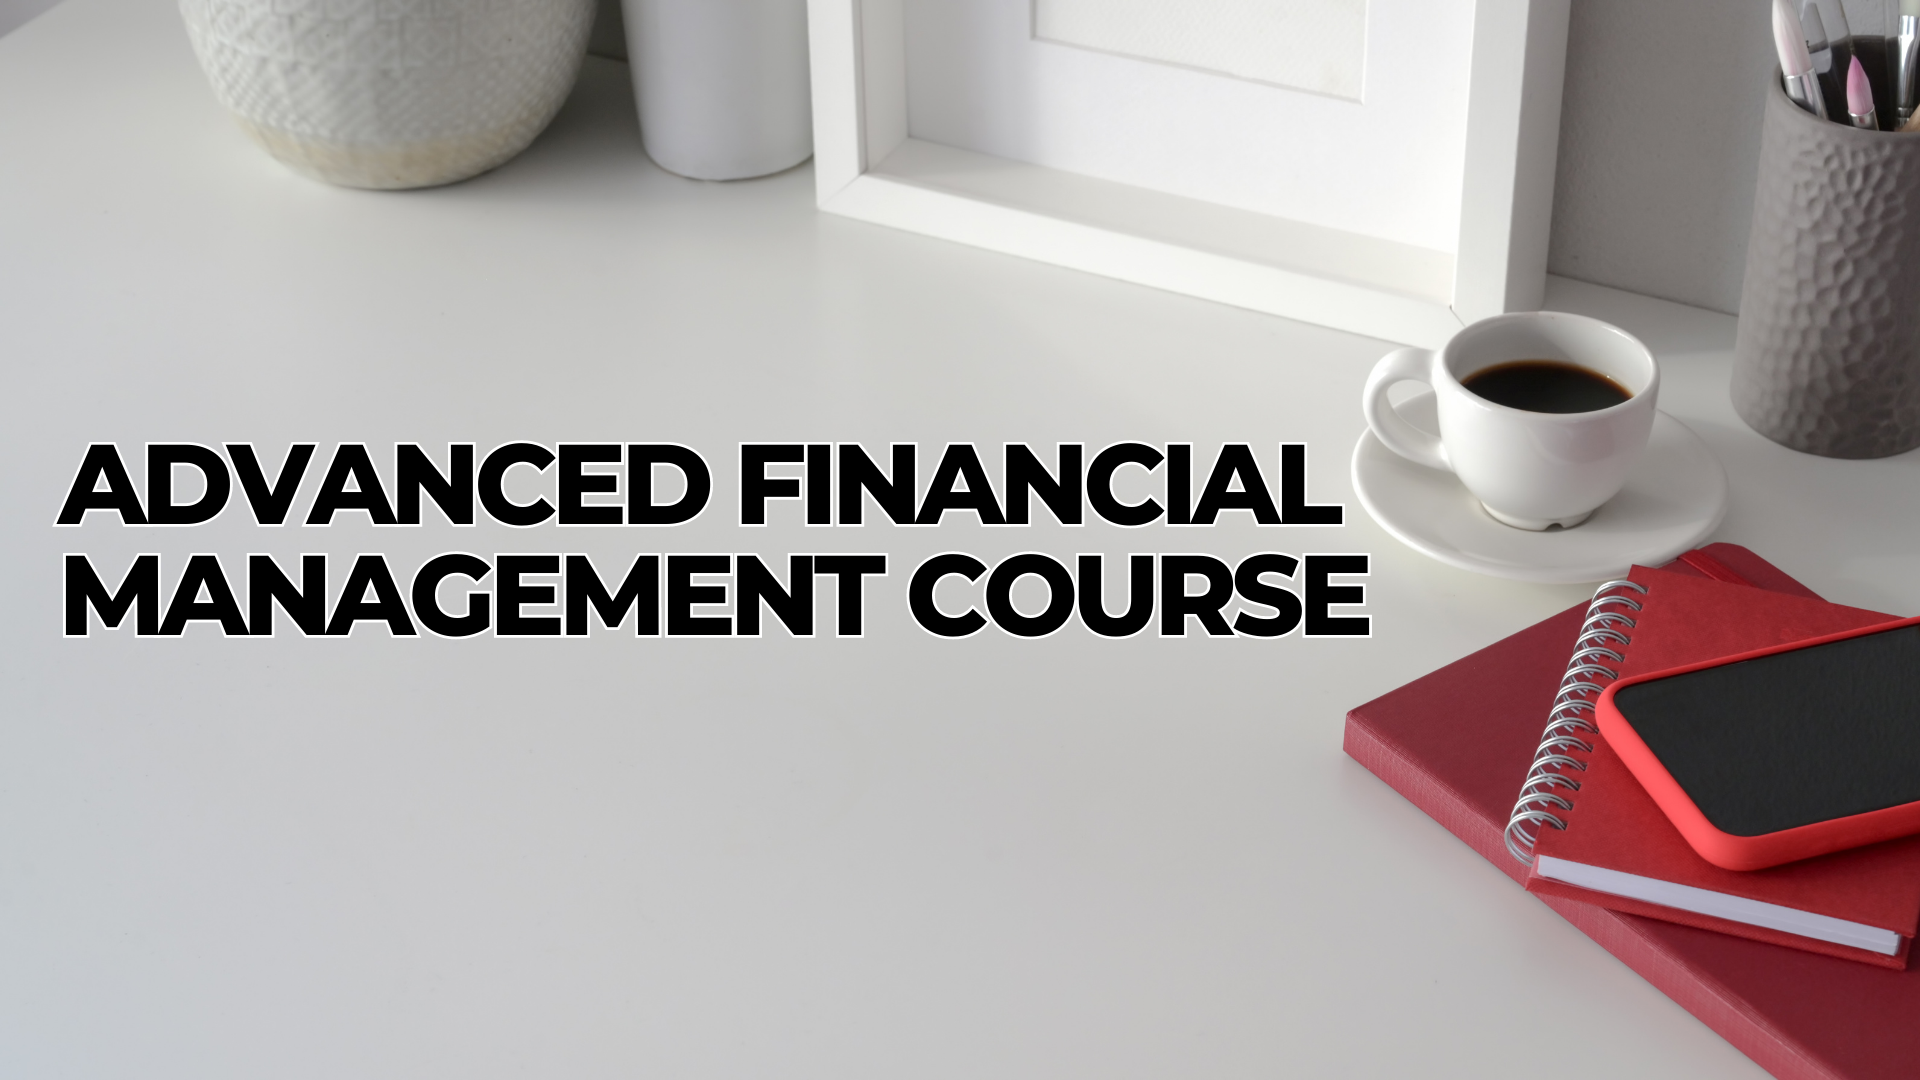 article review on advanced financial management